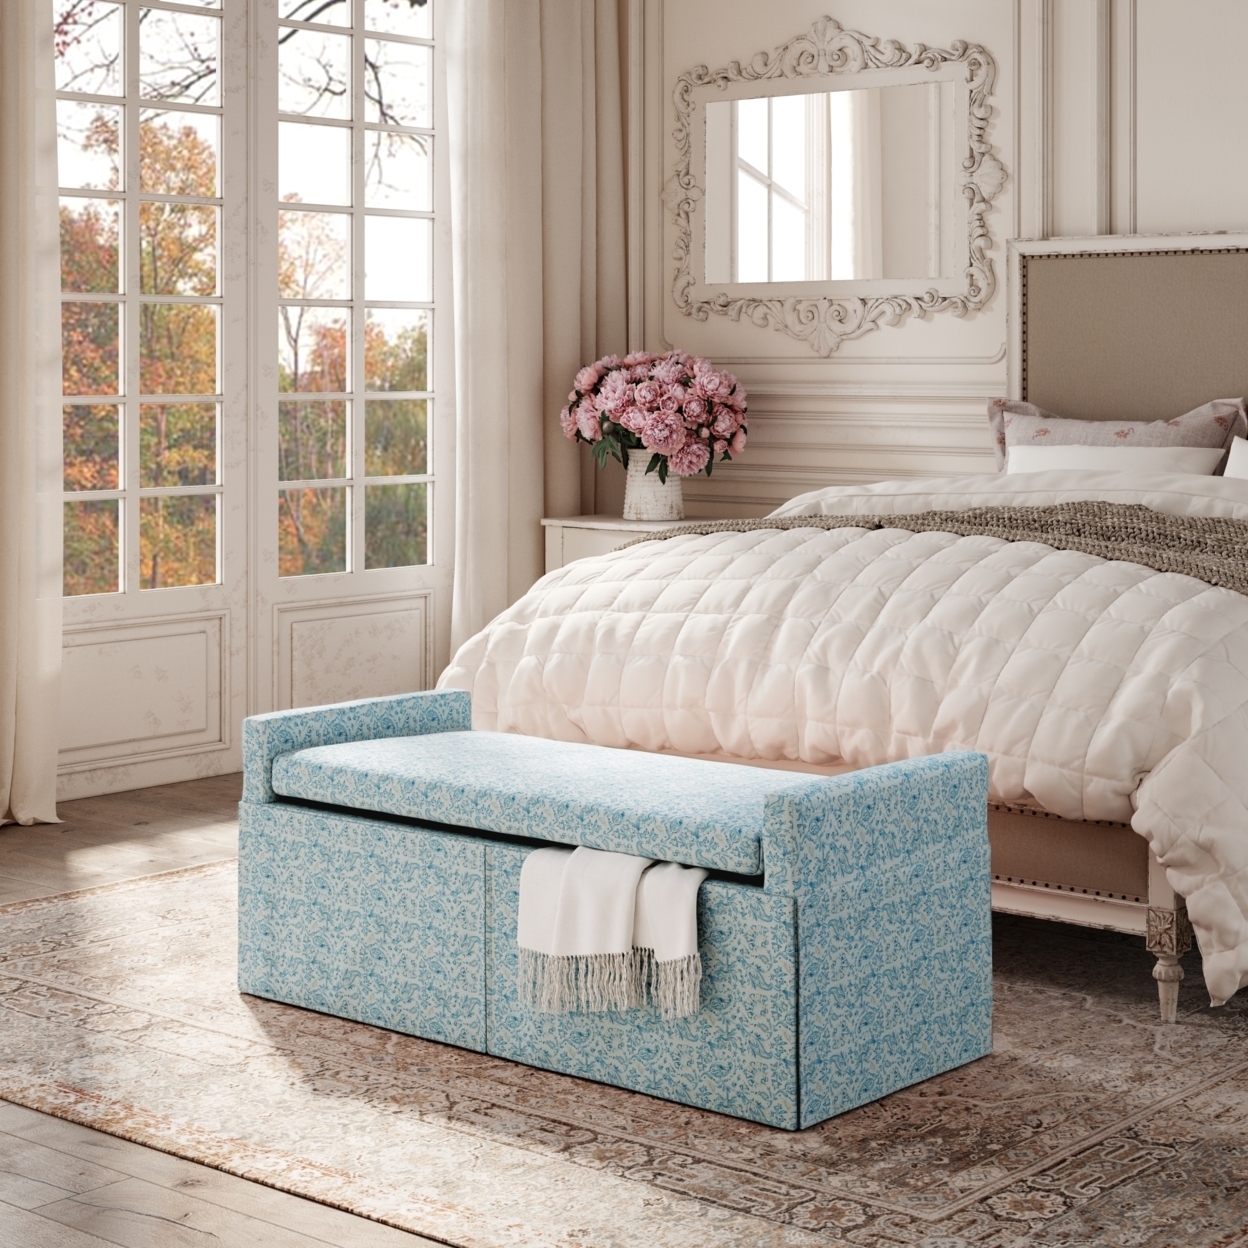 Xitlali Bench-Upholstered-Square Arms-Hinged Lid - Indes Blue Ground